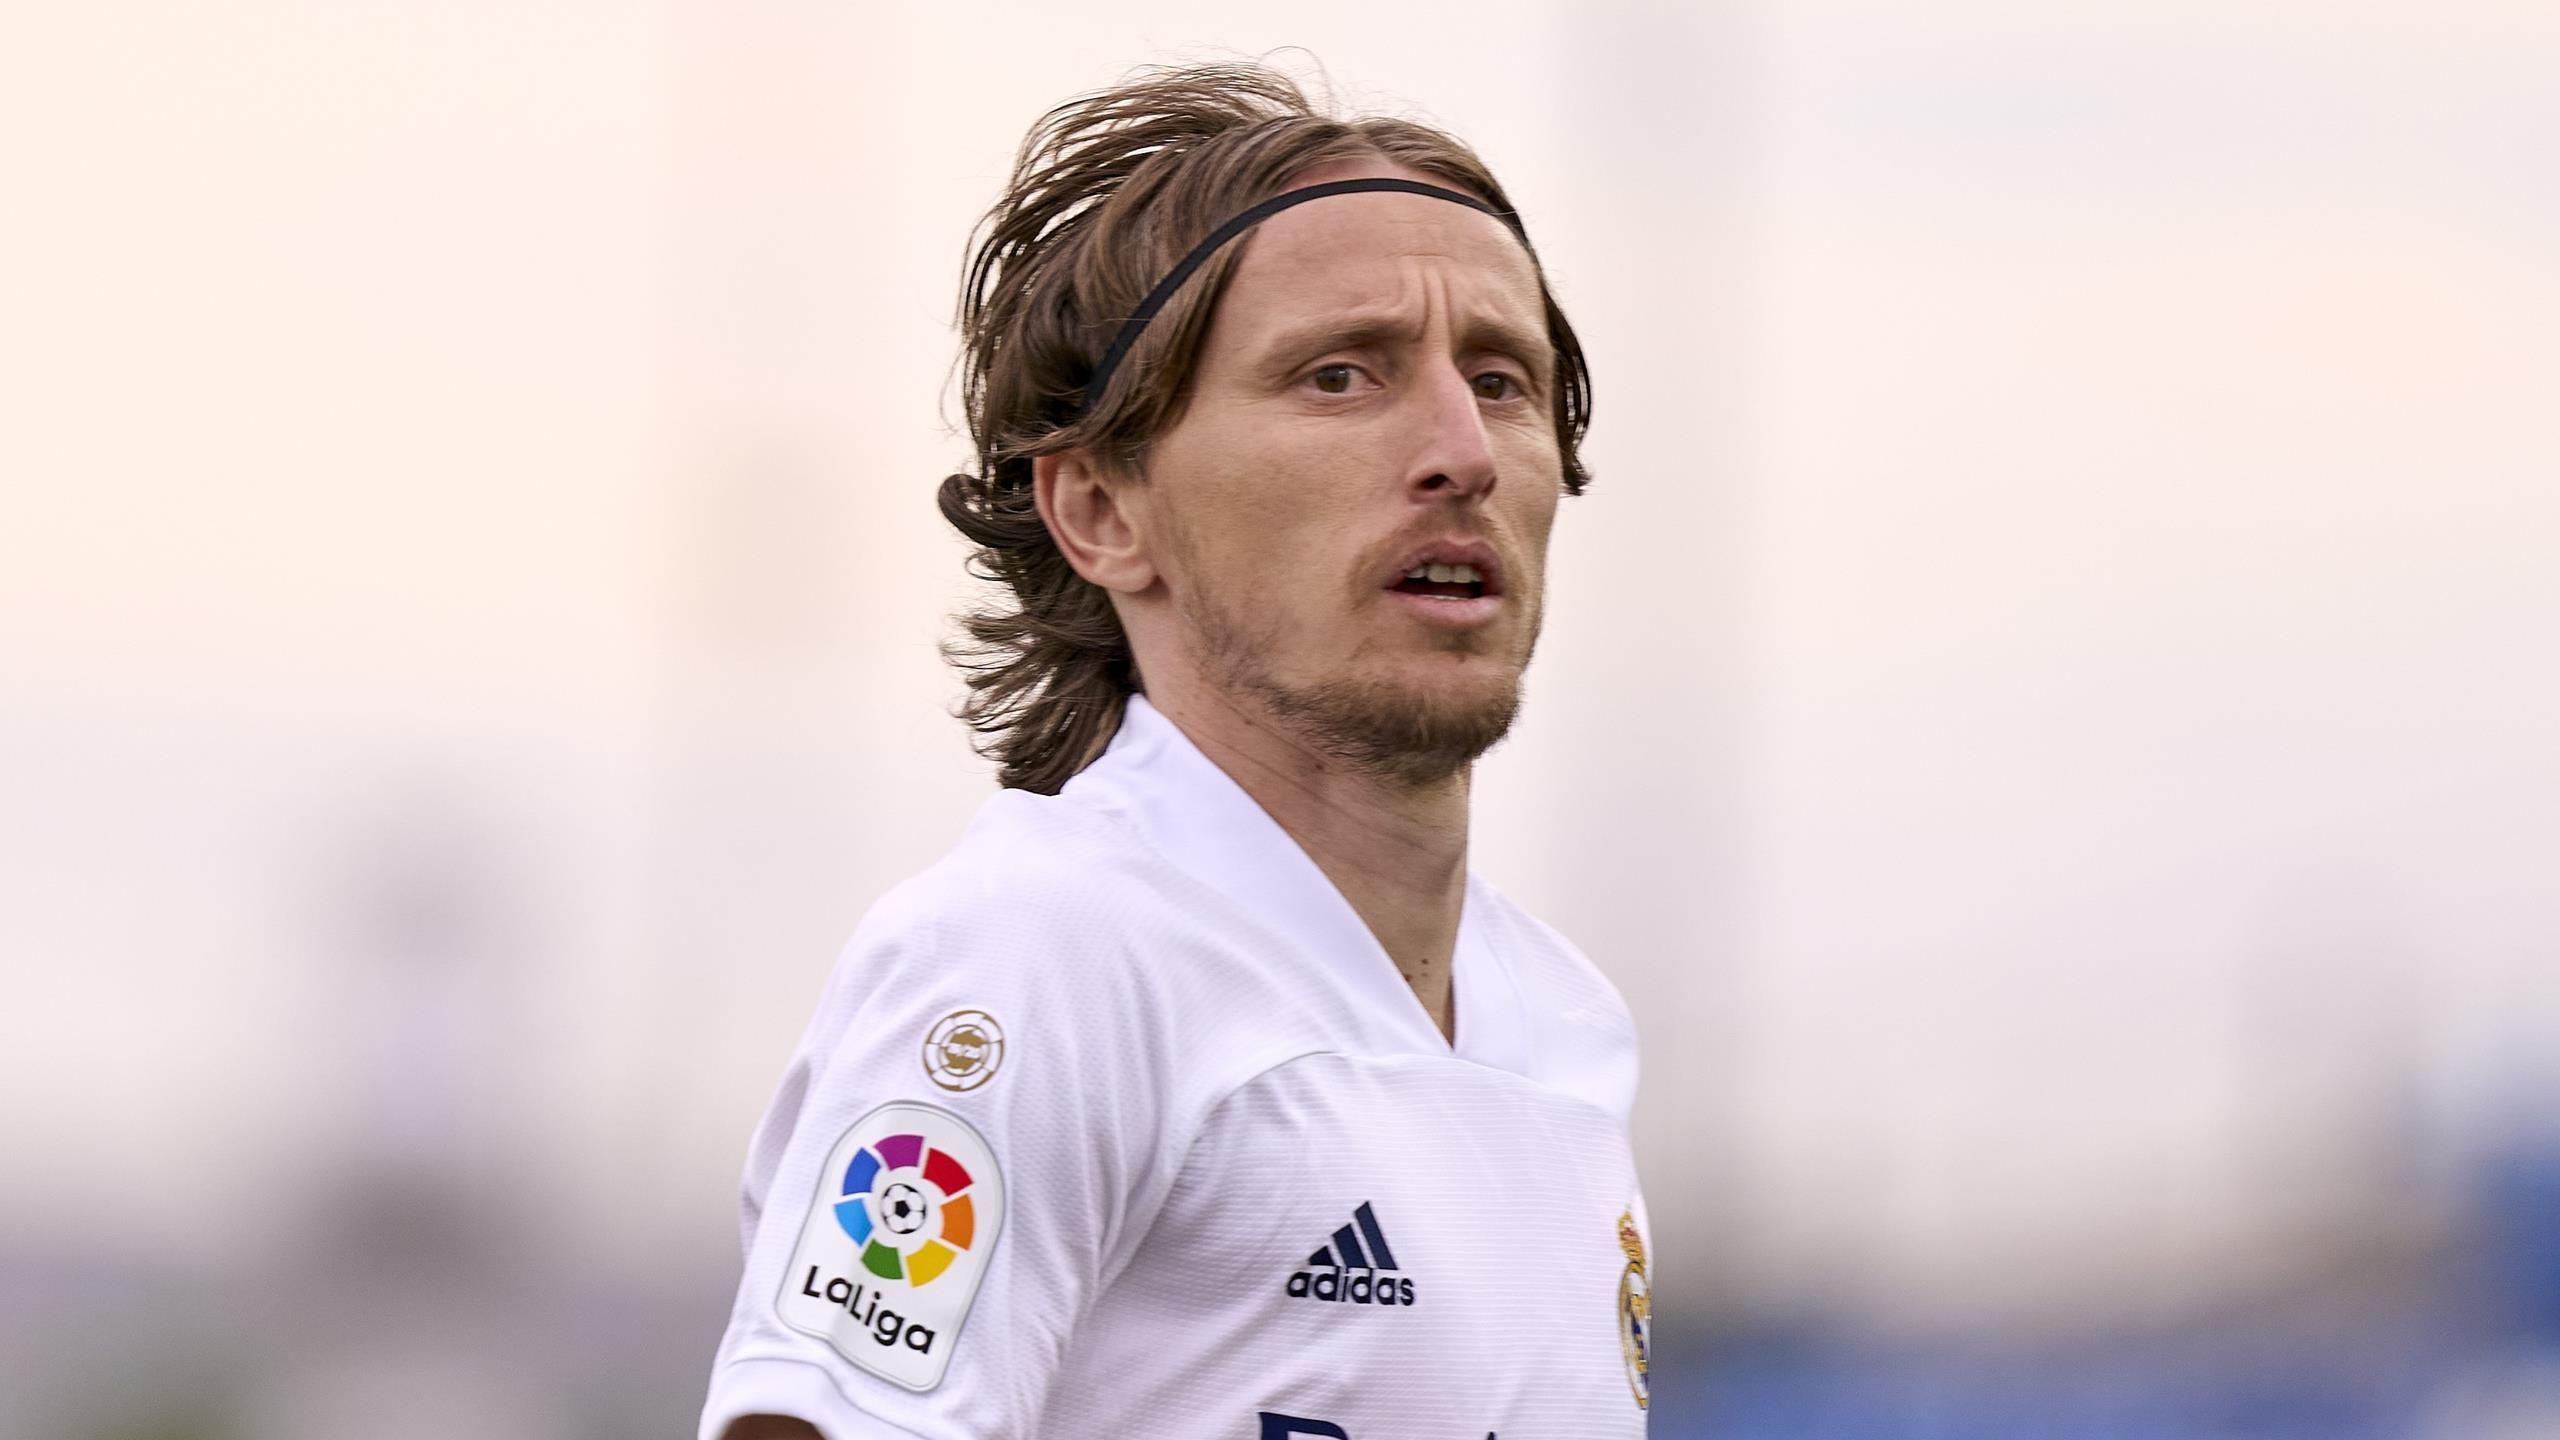 Croatian captain Luka Modrić says 2022 World Cup will be his last in the national team